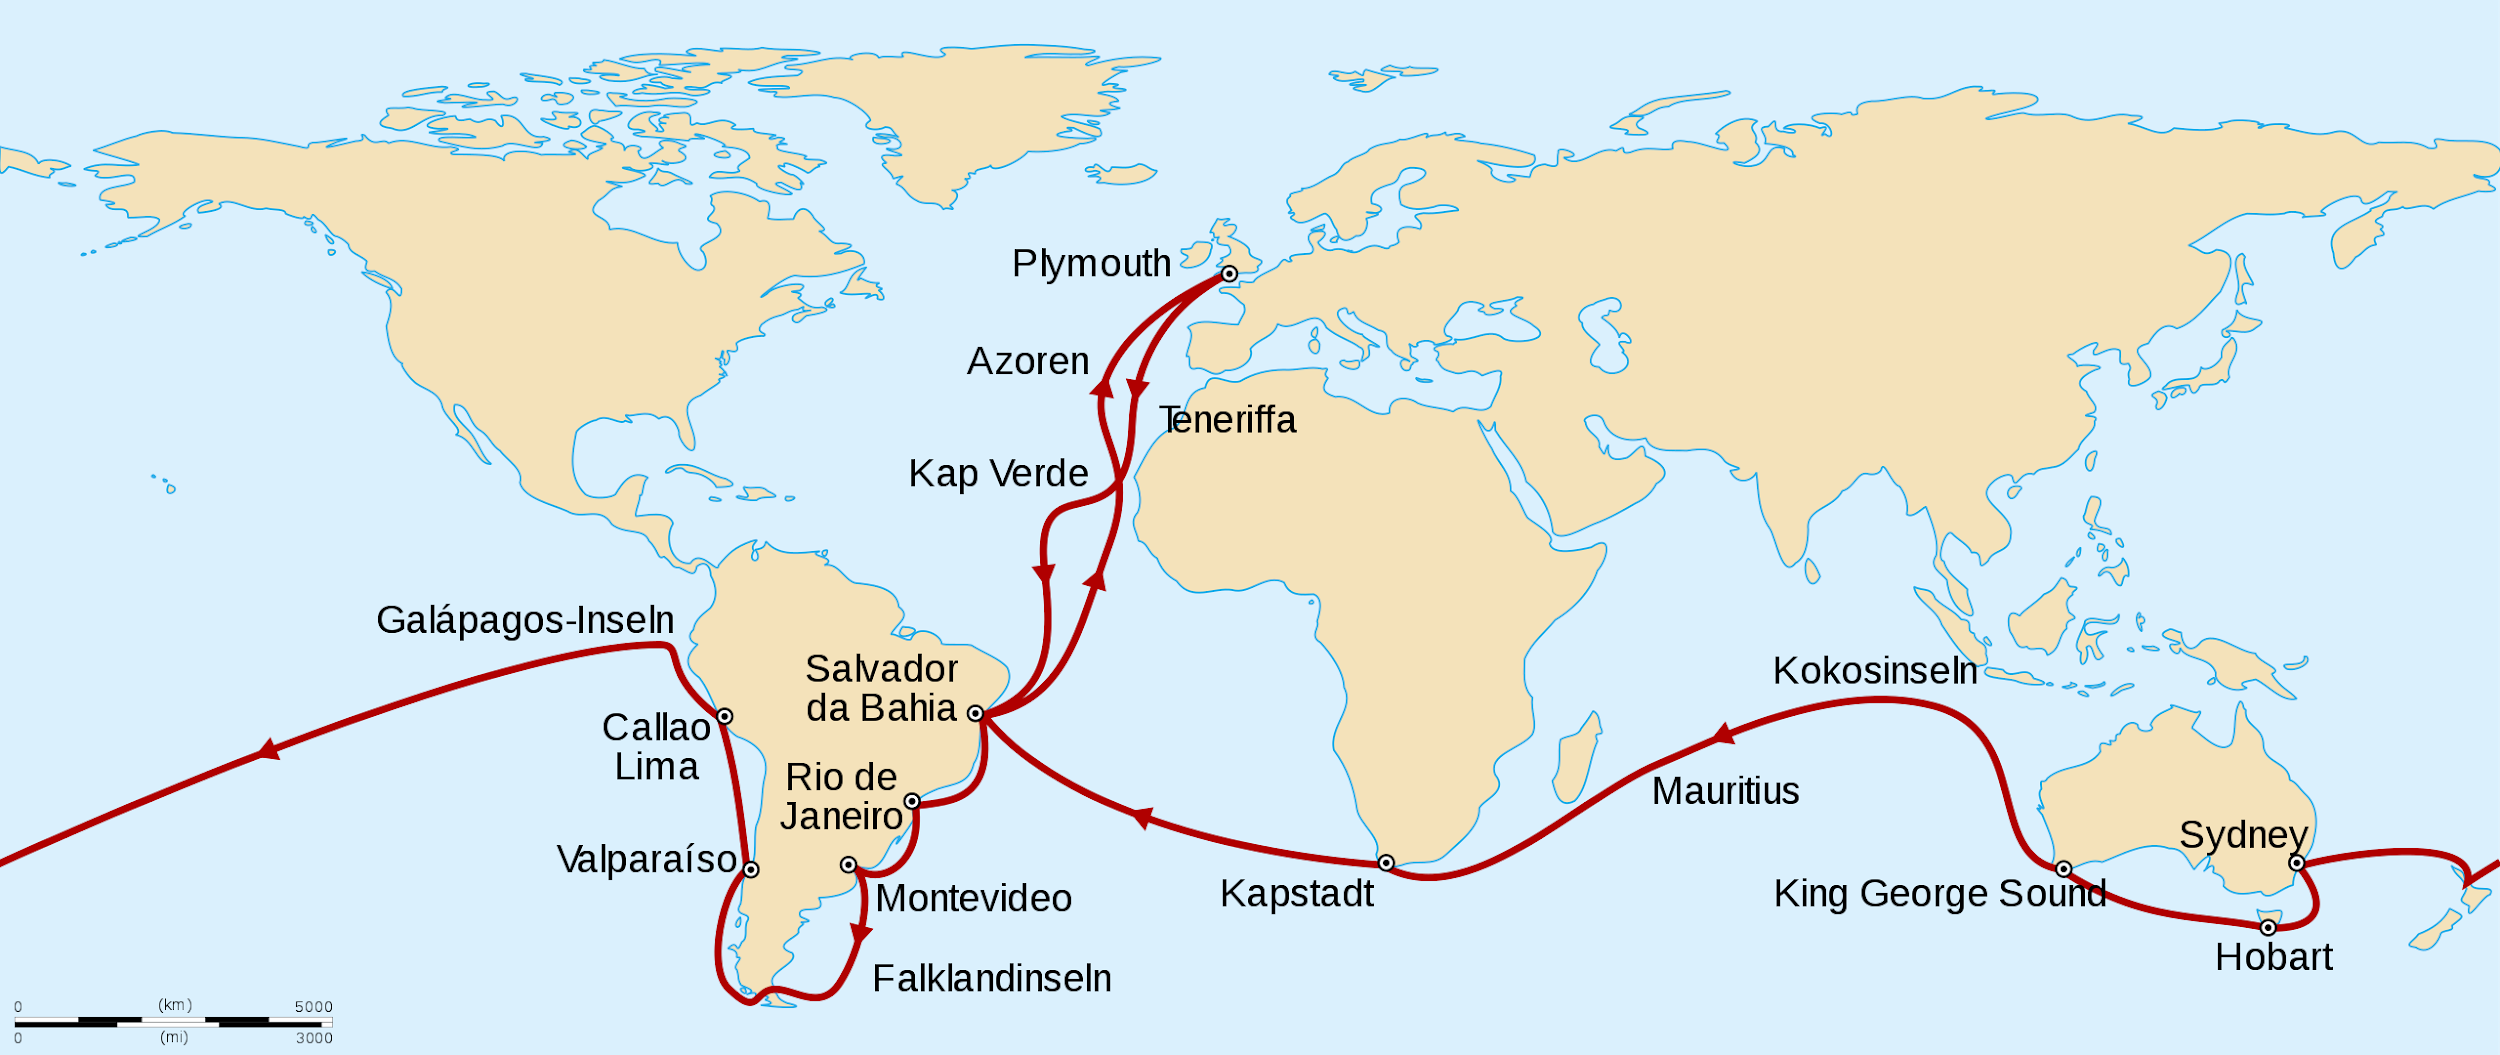 The voyage of the Beagle throughout the world.